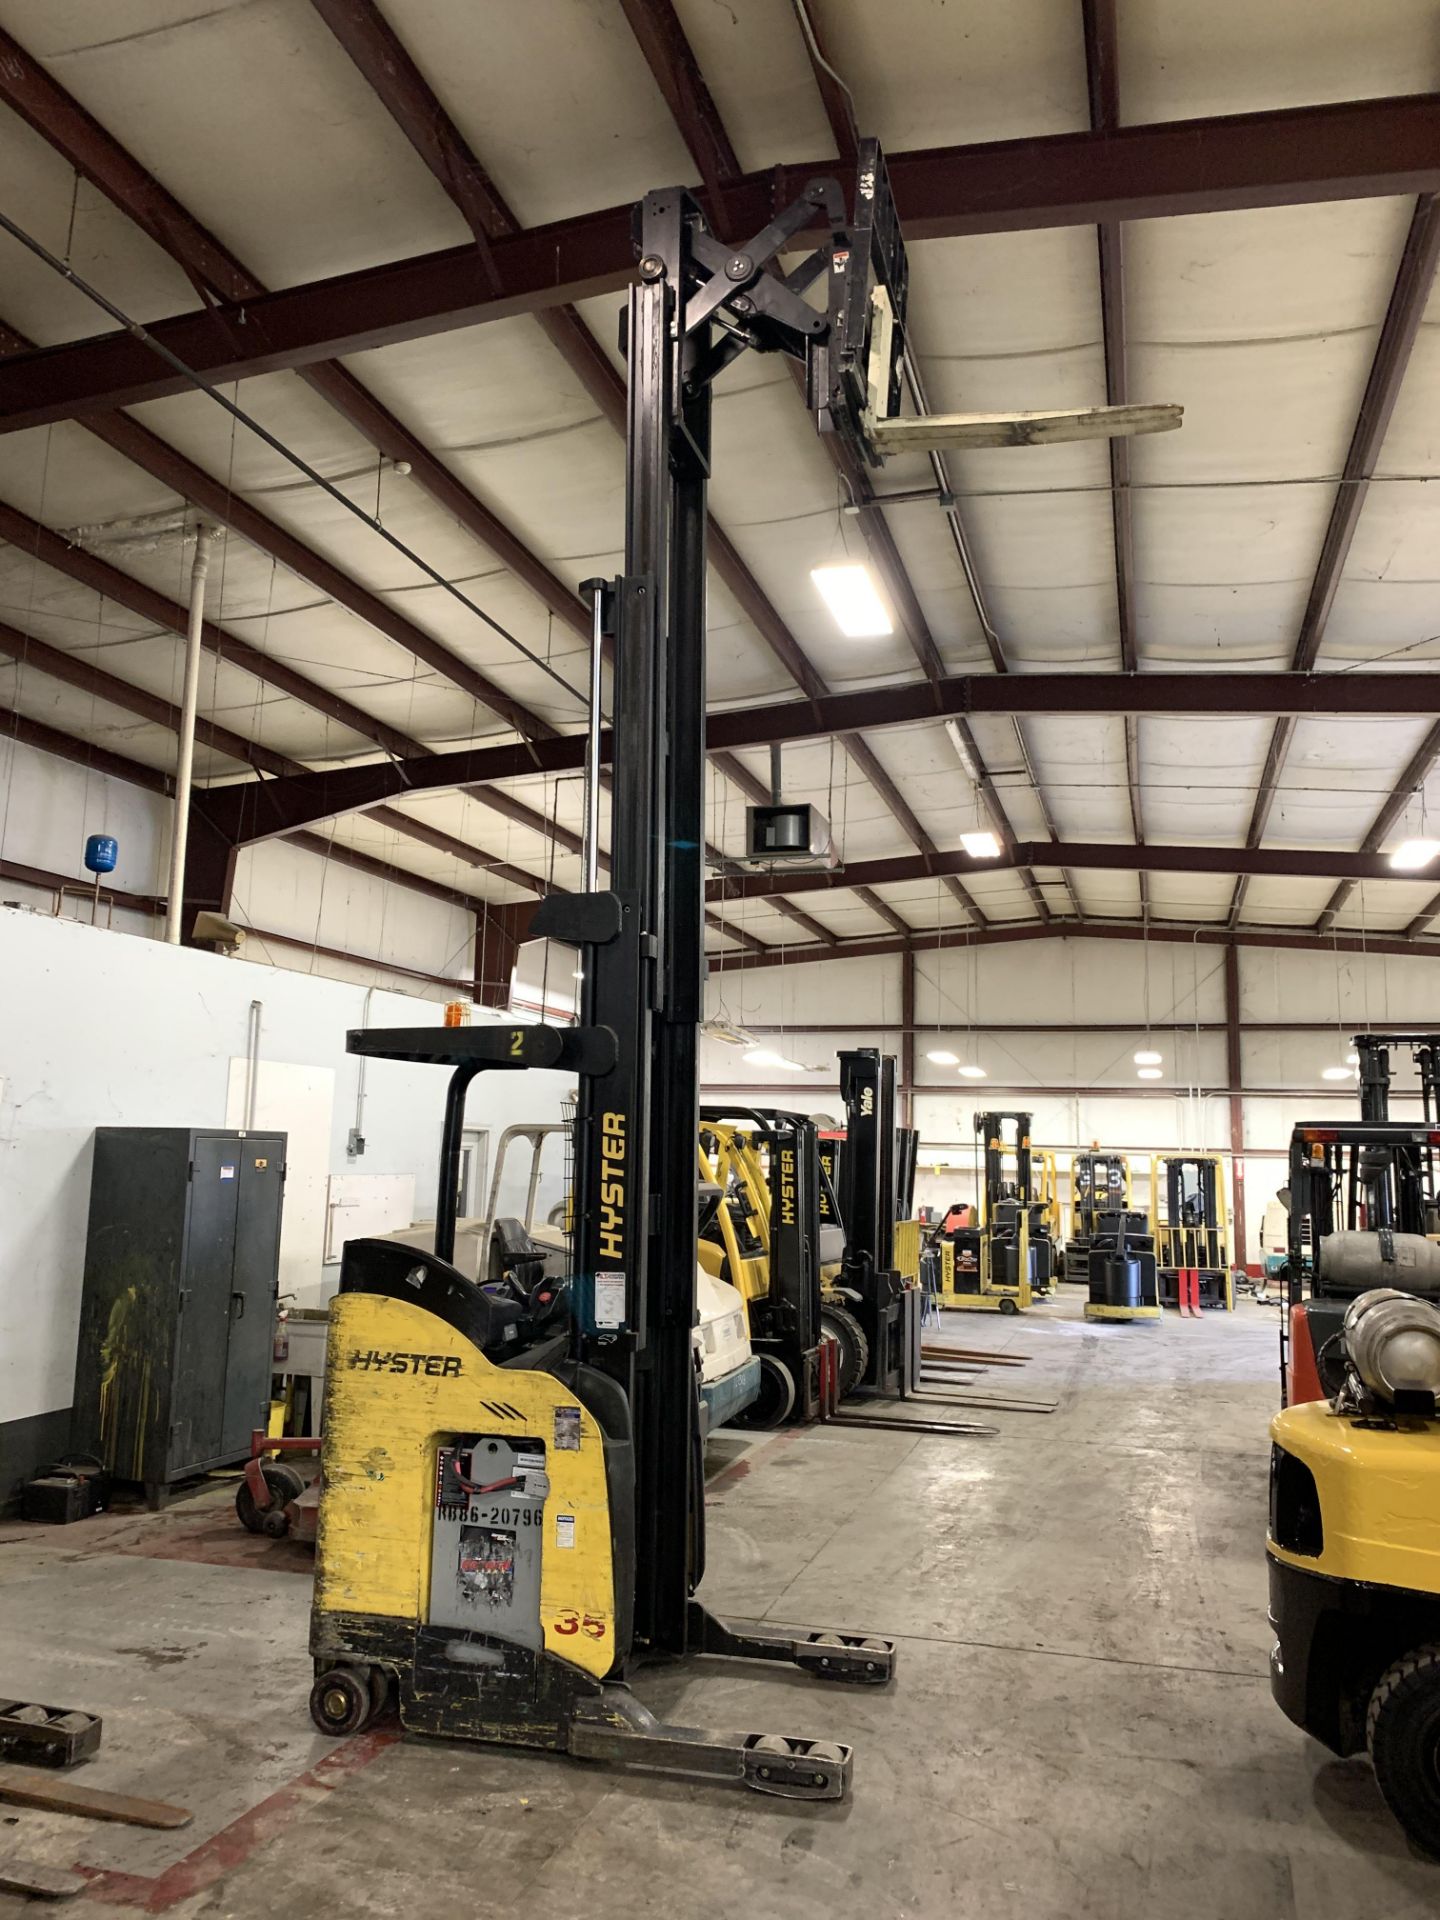 *LOCATED IN OHIO* 2015 HYSTER 3,500-LB. CAPACITY REACH TRUCK, MOD NR35, 111" LOWER/251'' LIFT HEIGHT - Image 8 of 8